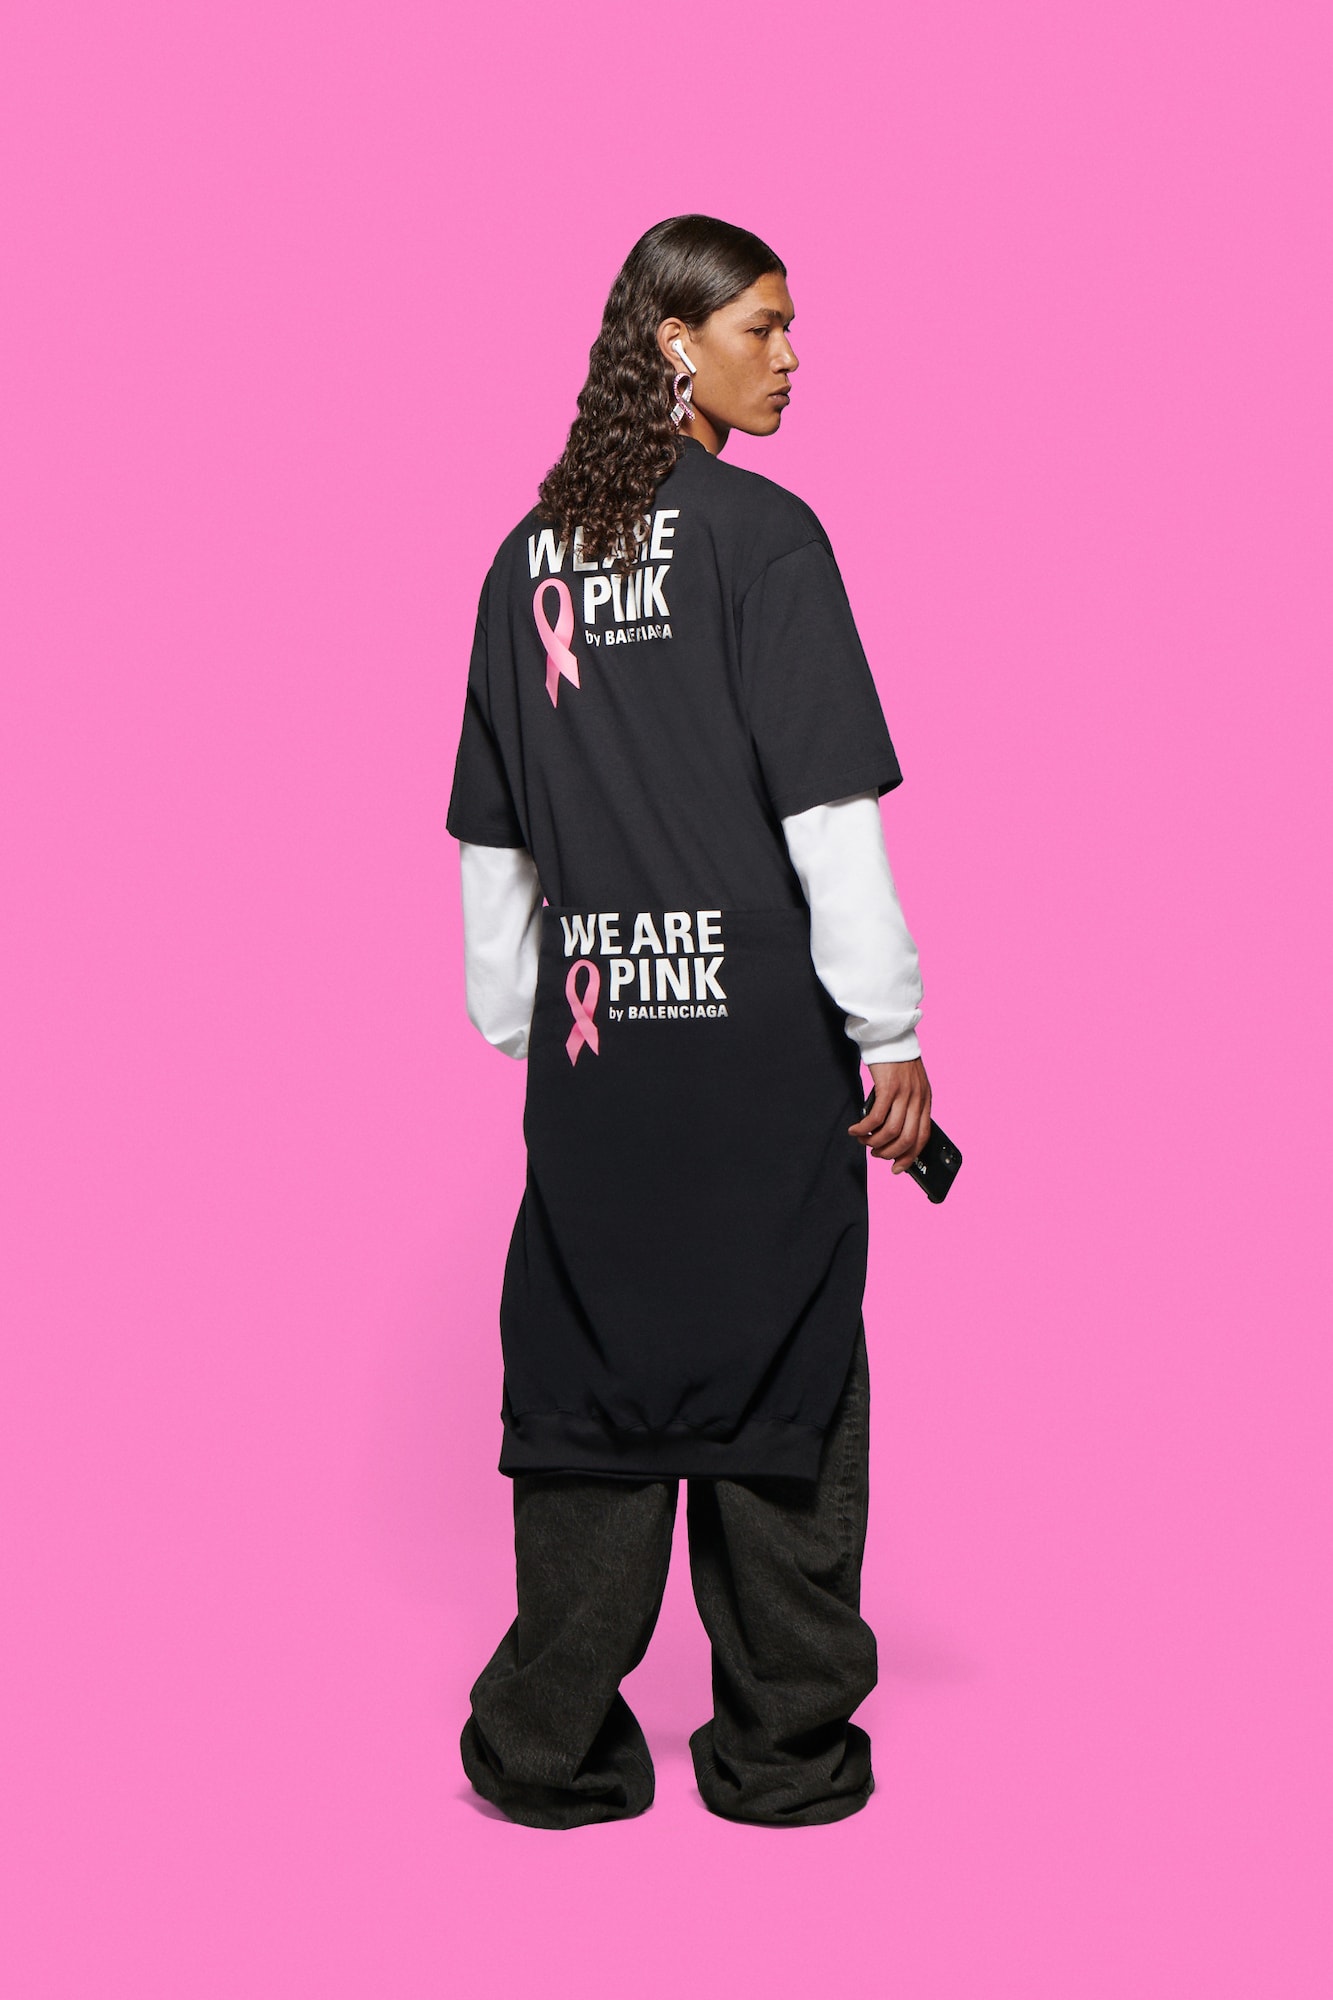 Balenciaga Pink Ribbon Breast Cancer Awareness Capsule Charity Institut Curie